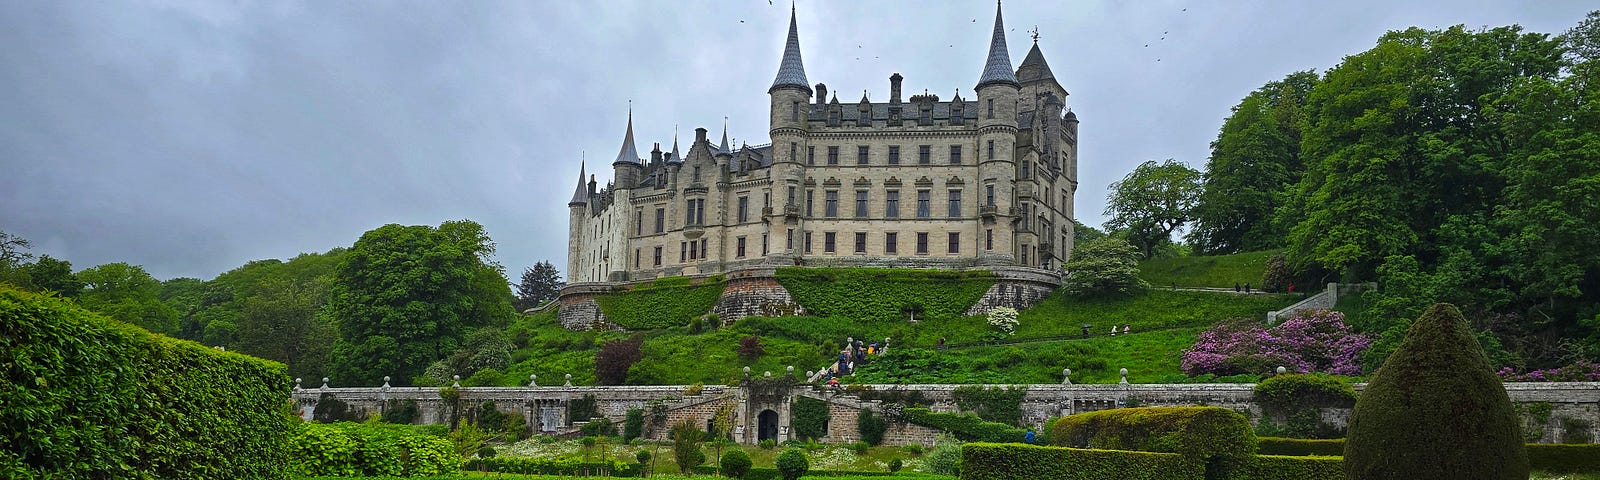 Magnificent view of Dunrobin Castle and Gardens.